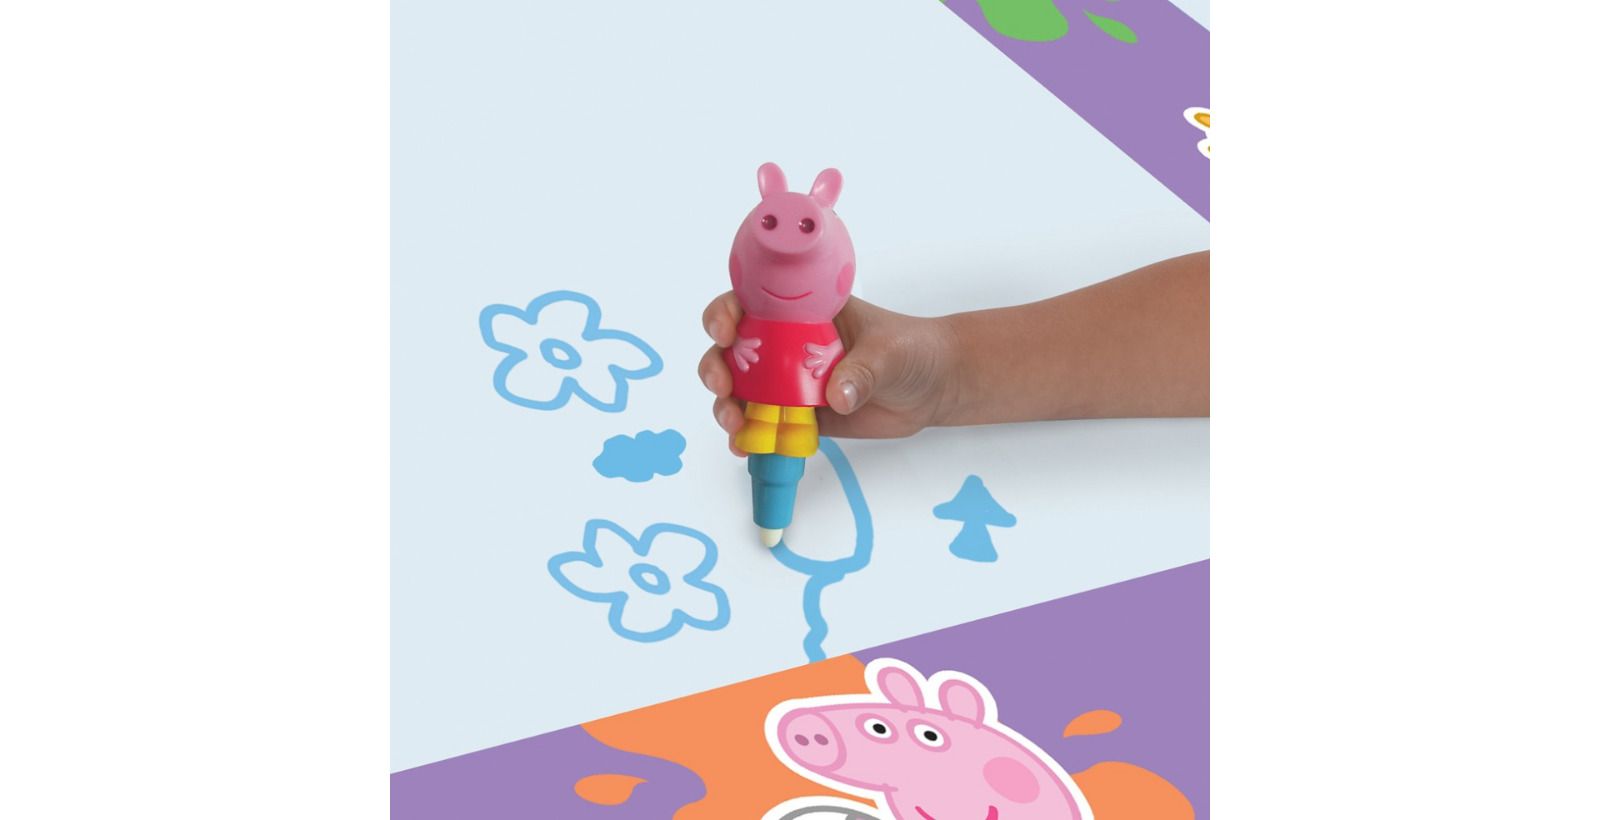 Aquadoodle Peppa Pig Mat: Allows no mess drawing by using water to